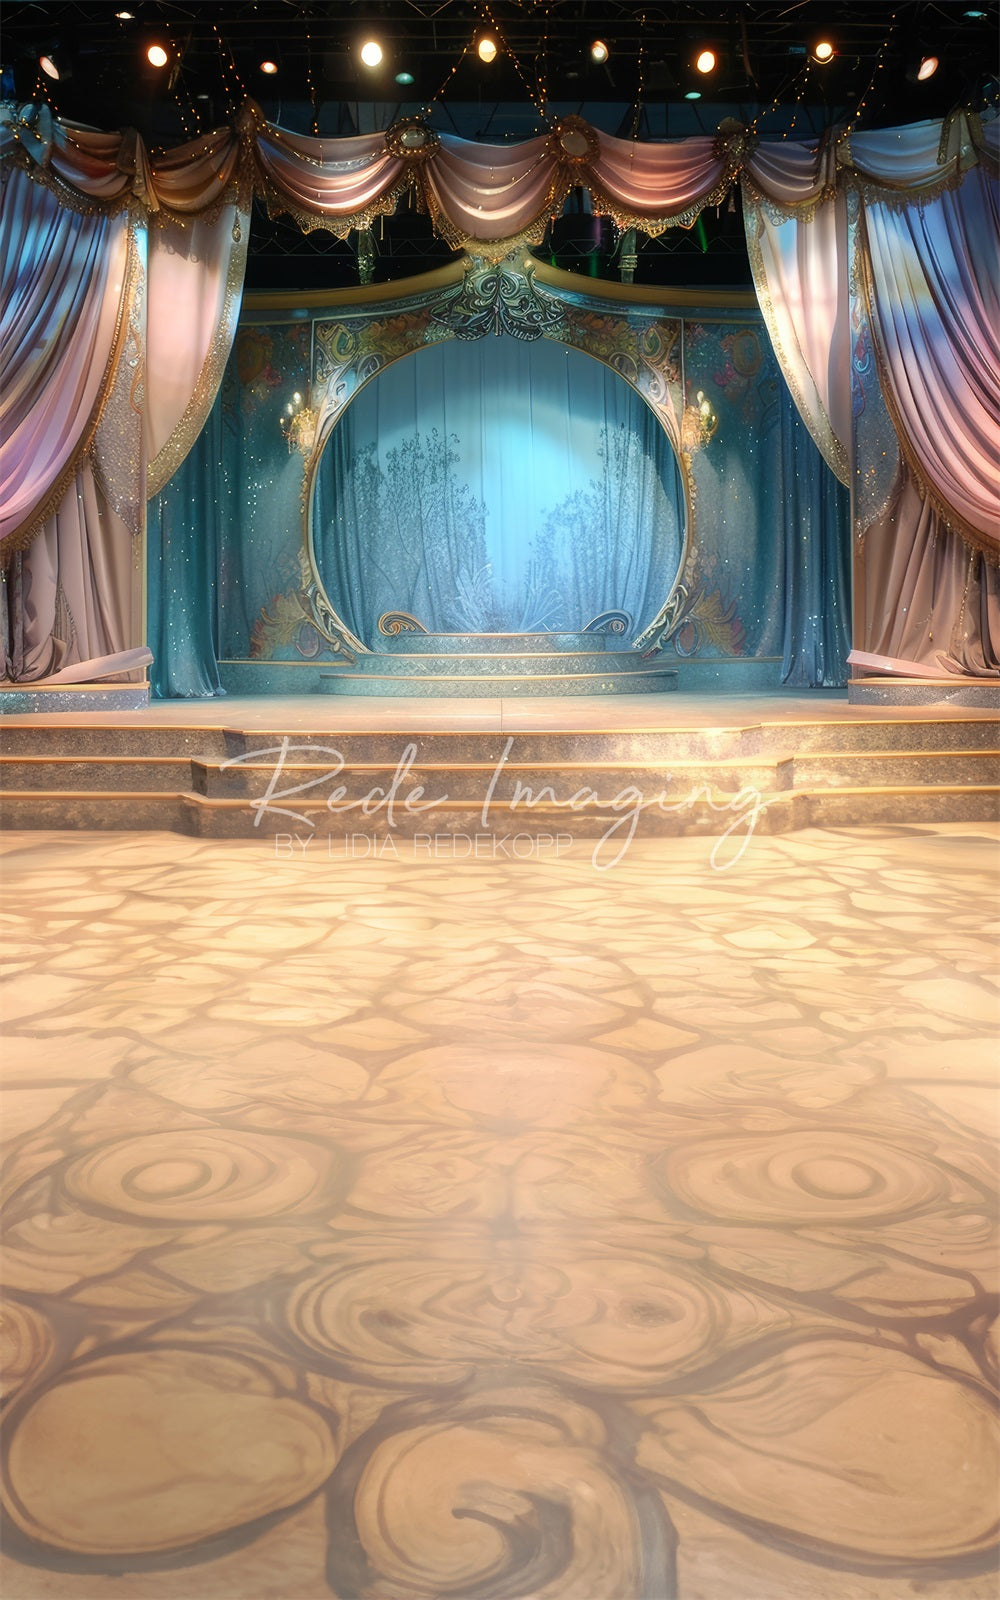 Kate Sweep Vintage Colorful Curtain Arched Dancer Stage Backdrop Designed by Lidia Redekopp